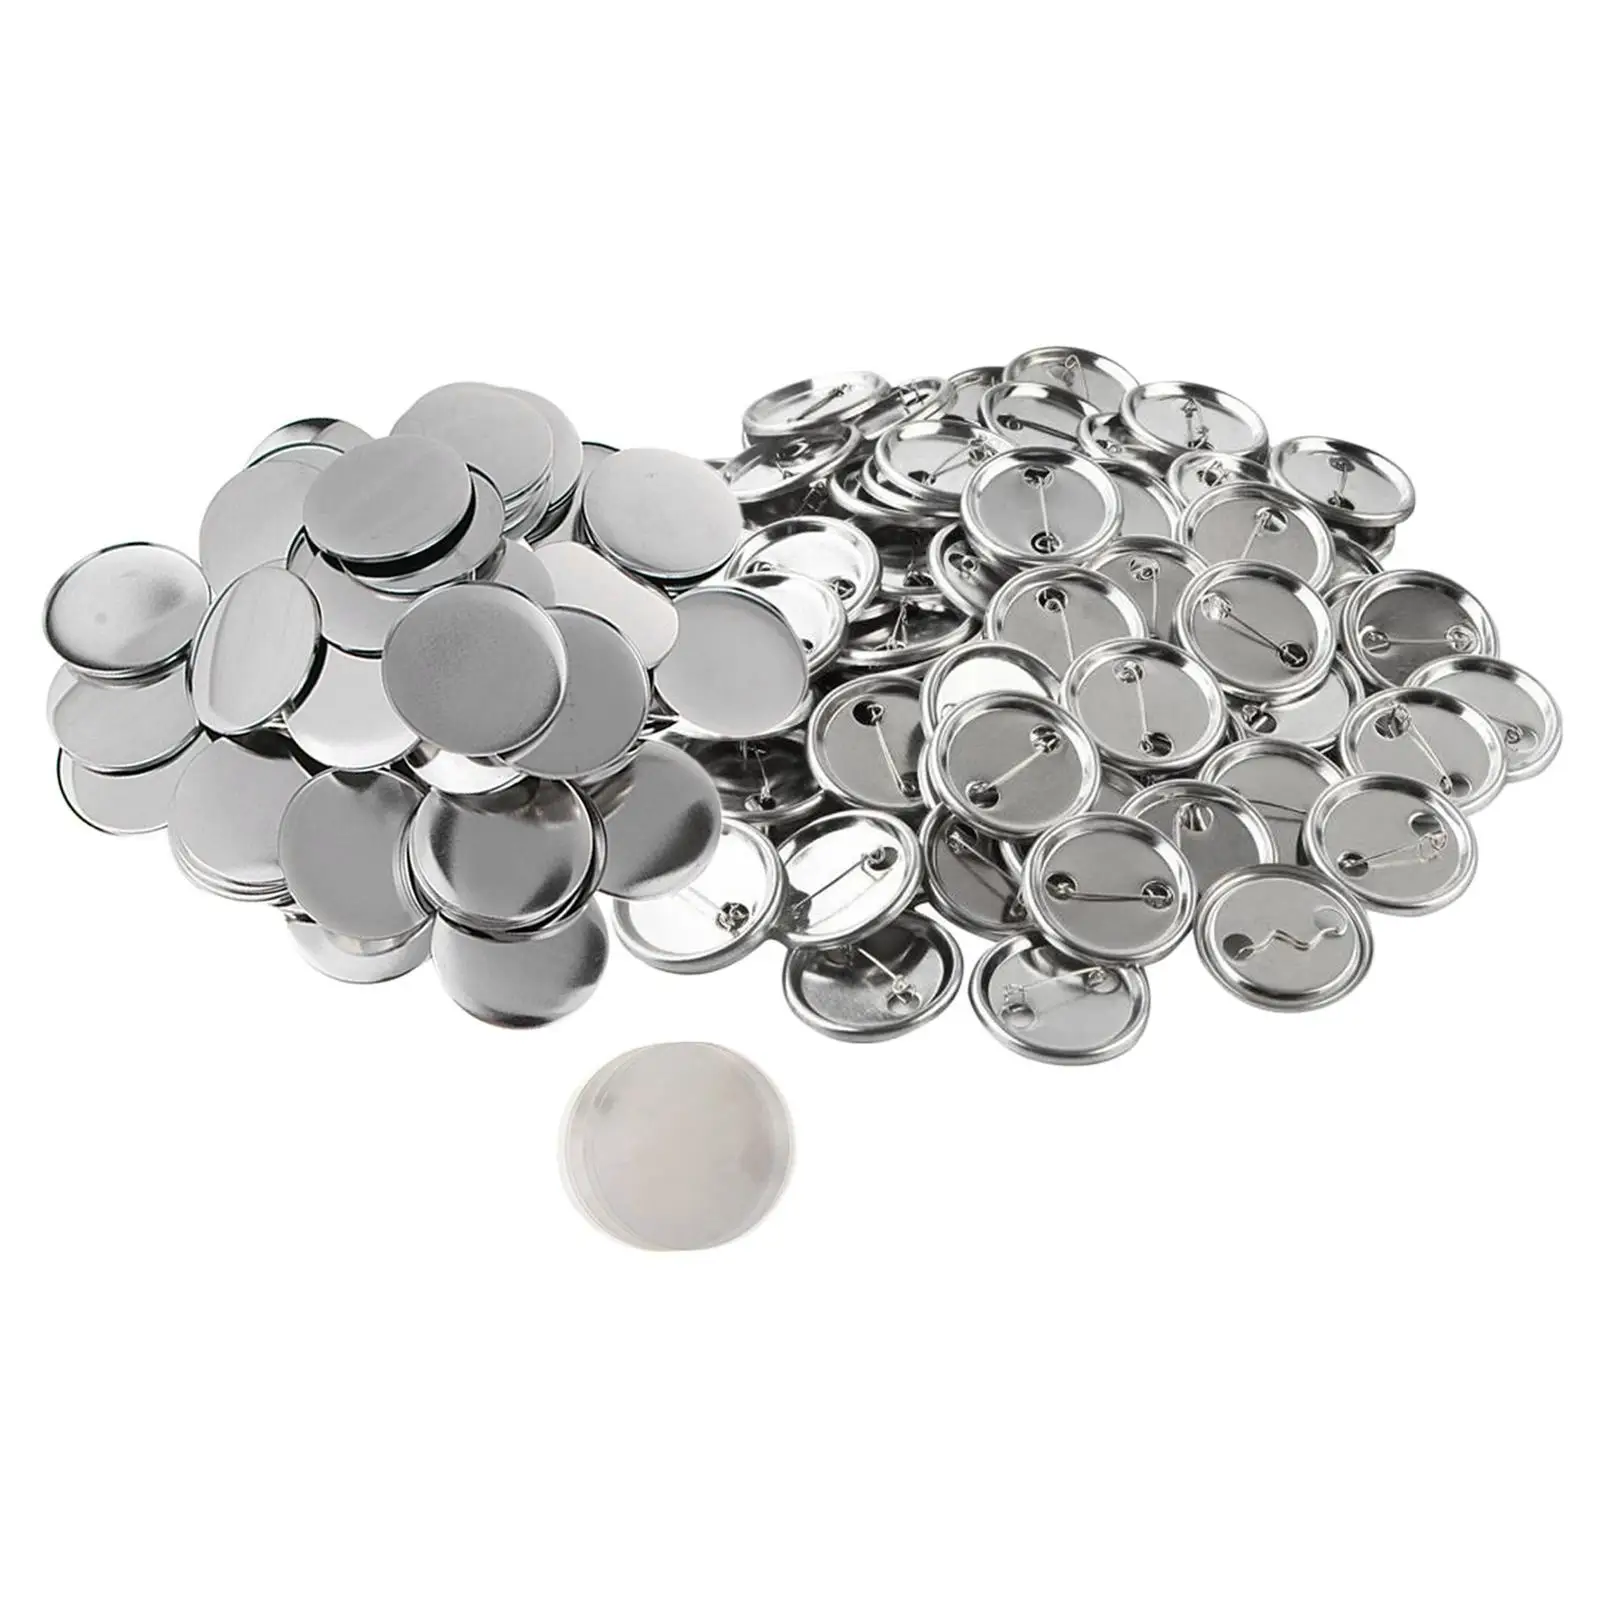 100 Pieces Blank Button Making Supplies Badge Making Materials Metal Button Pin Badge for Button Making Machine DIY Arts Crafts